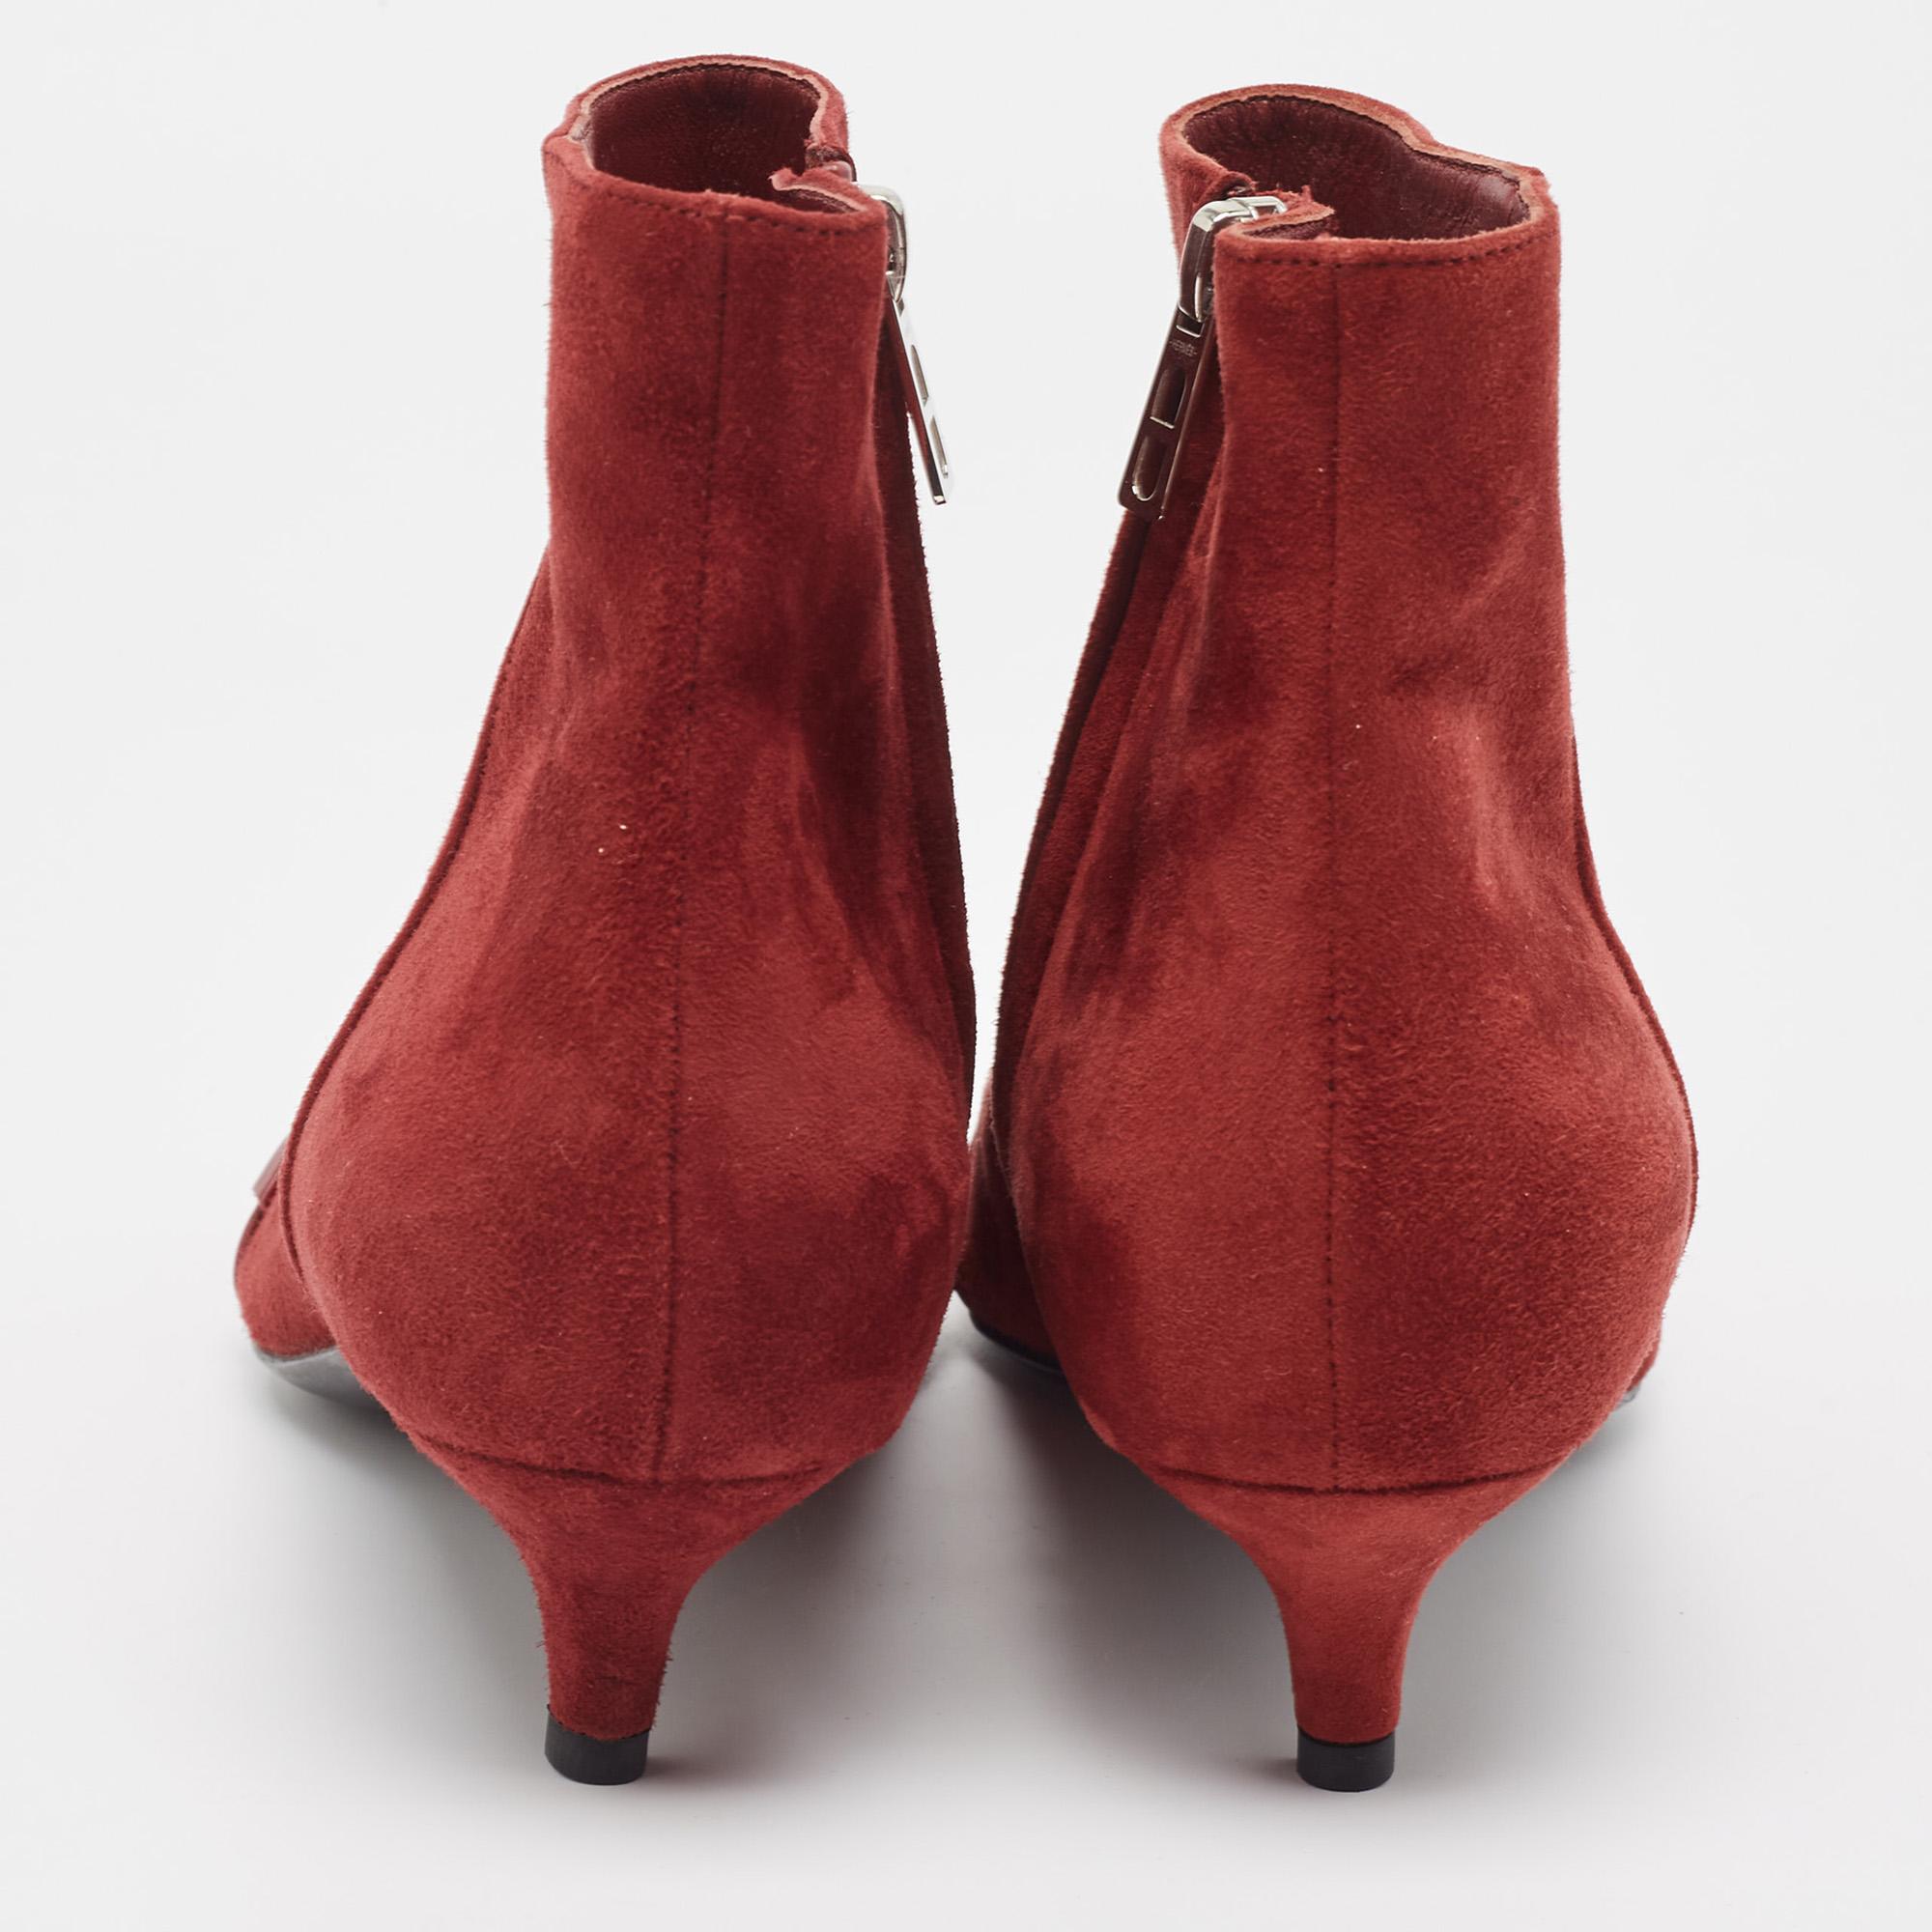 Hermès Dark Red Suede Ankle Booties Size 38 For Sale 1